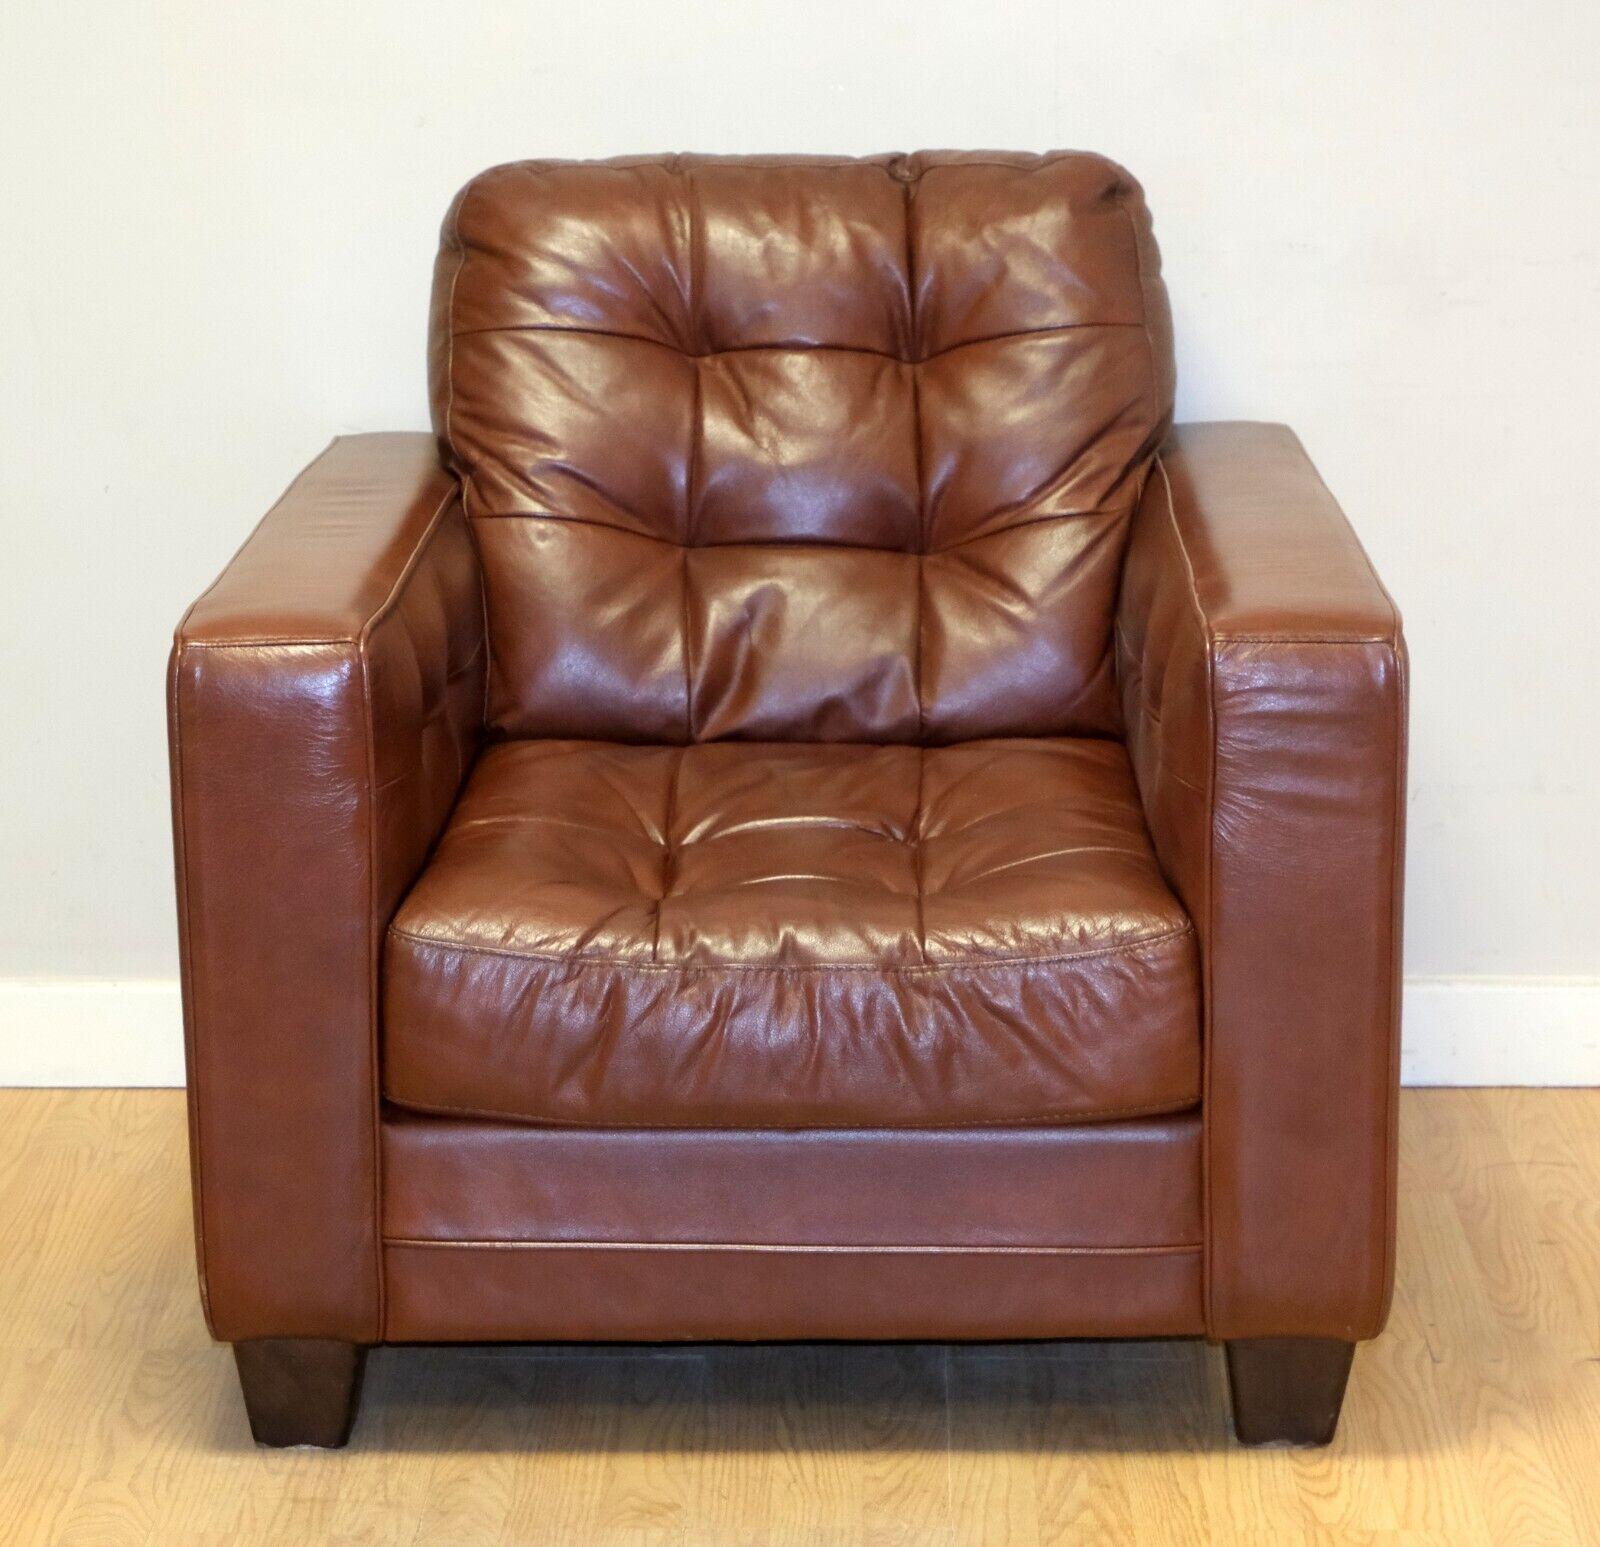 Aged Knoll Style Brown Leather Armchair Chesterfield Style Buttoning Track Arms For Sale 5